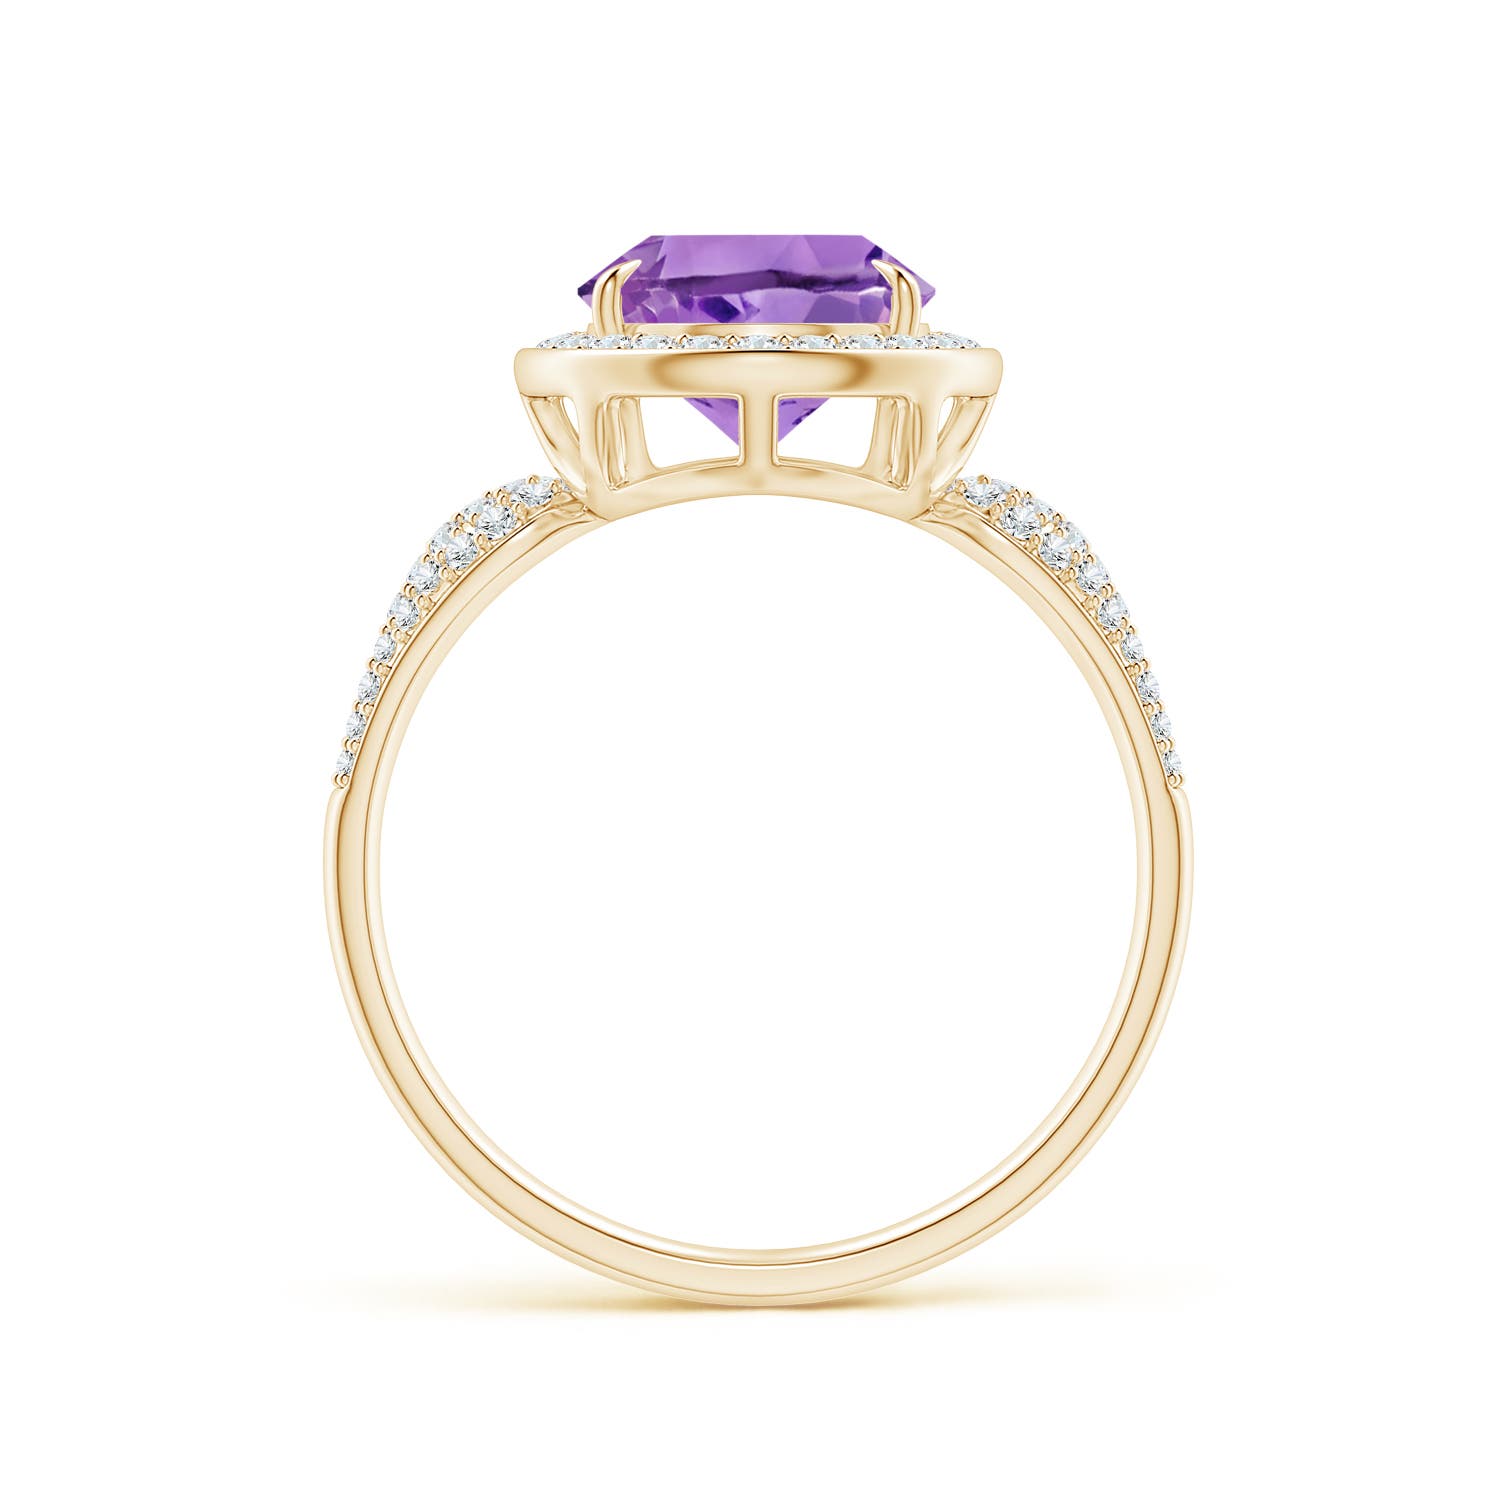 A - Amethyst / 3.07 CT / 14 KT Yellow Gold